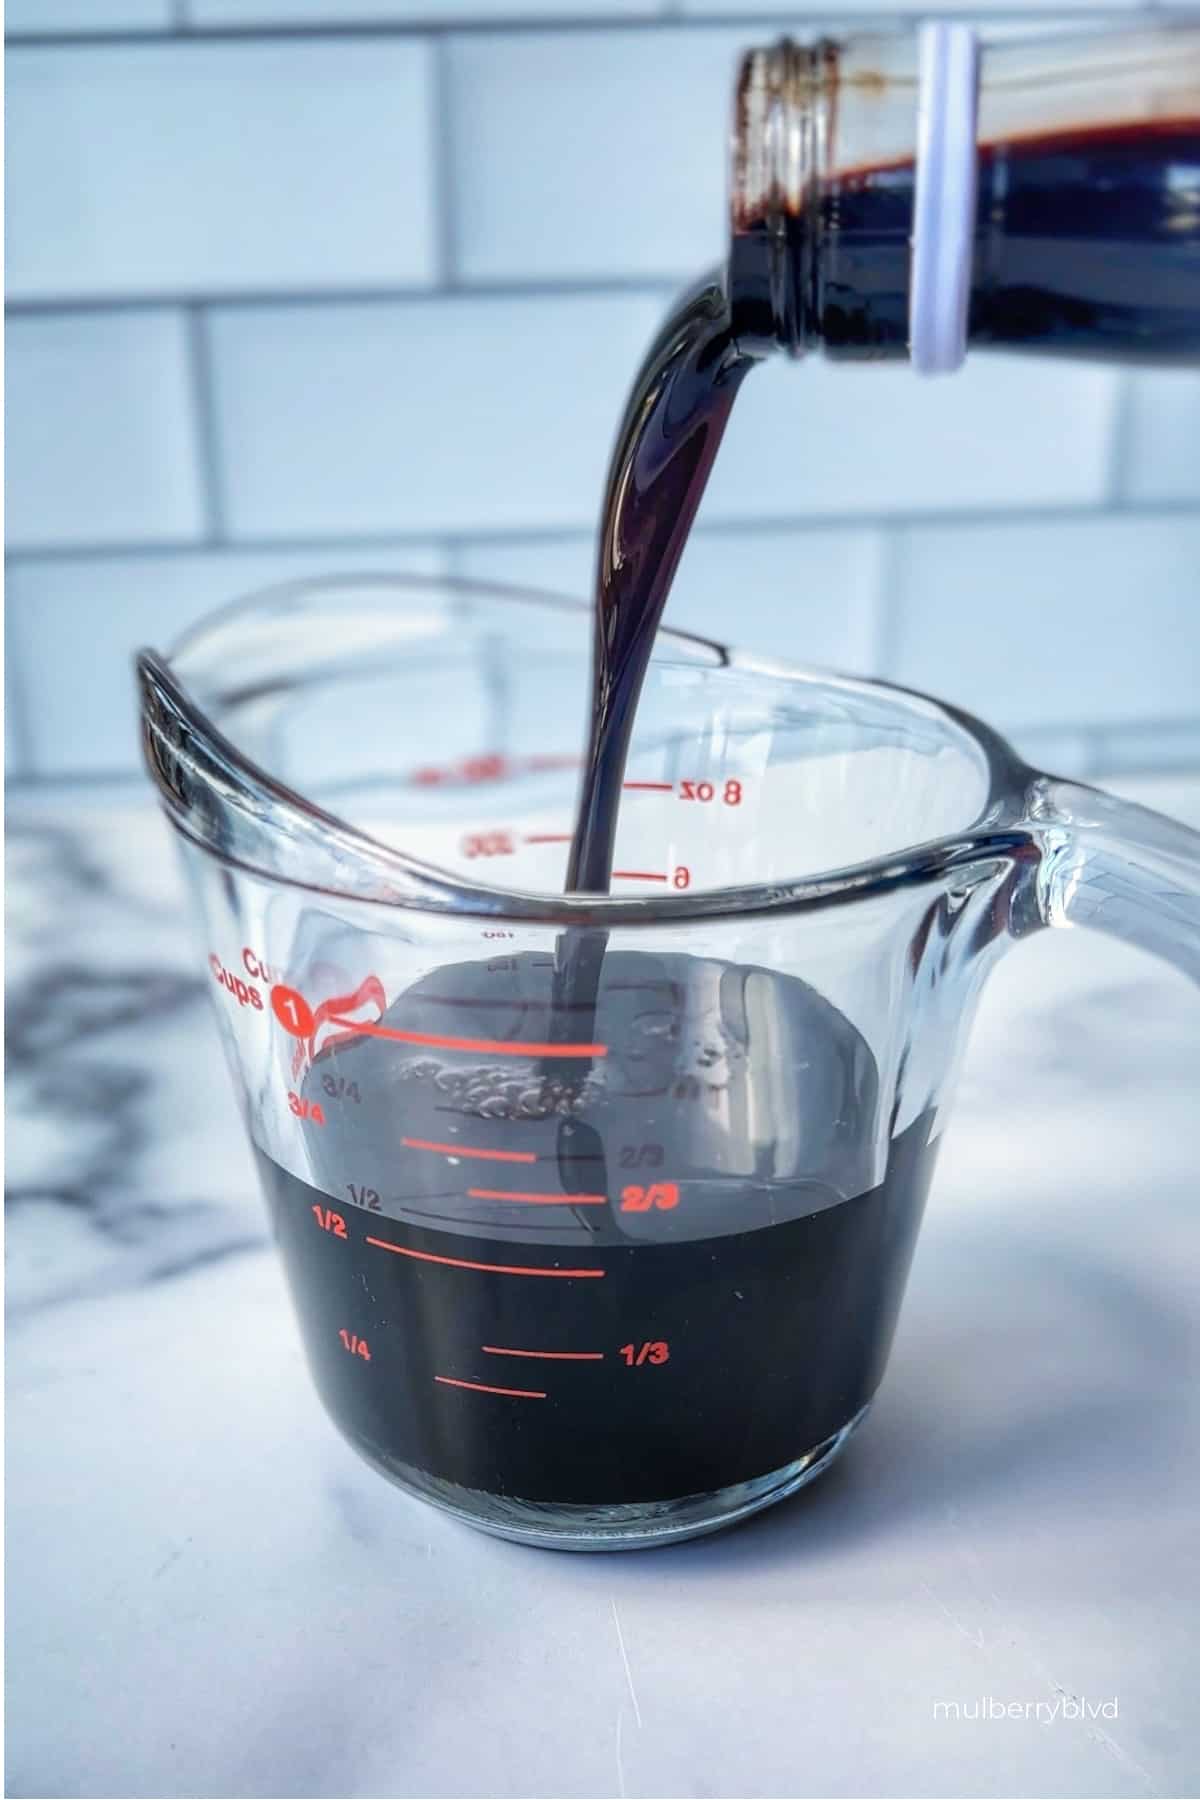 Pomegranate molasses being poured into measuring vessel